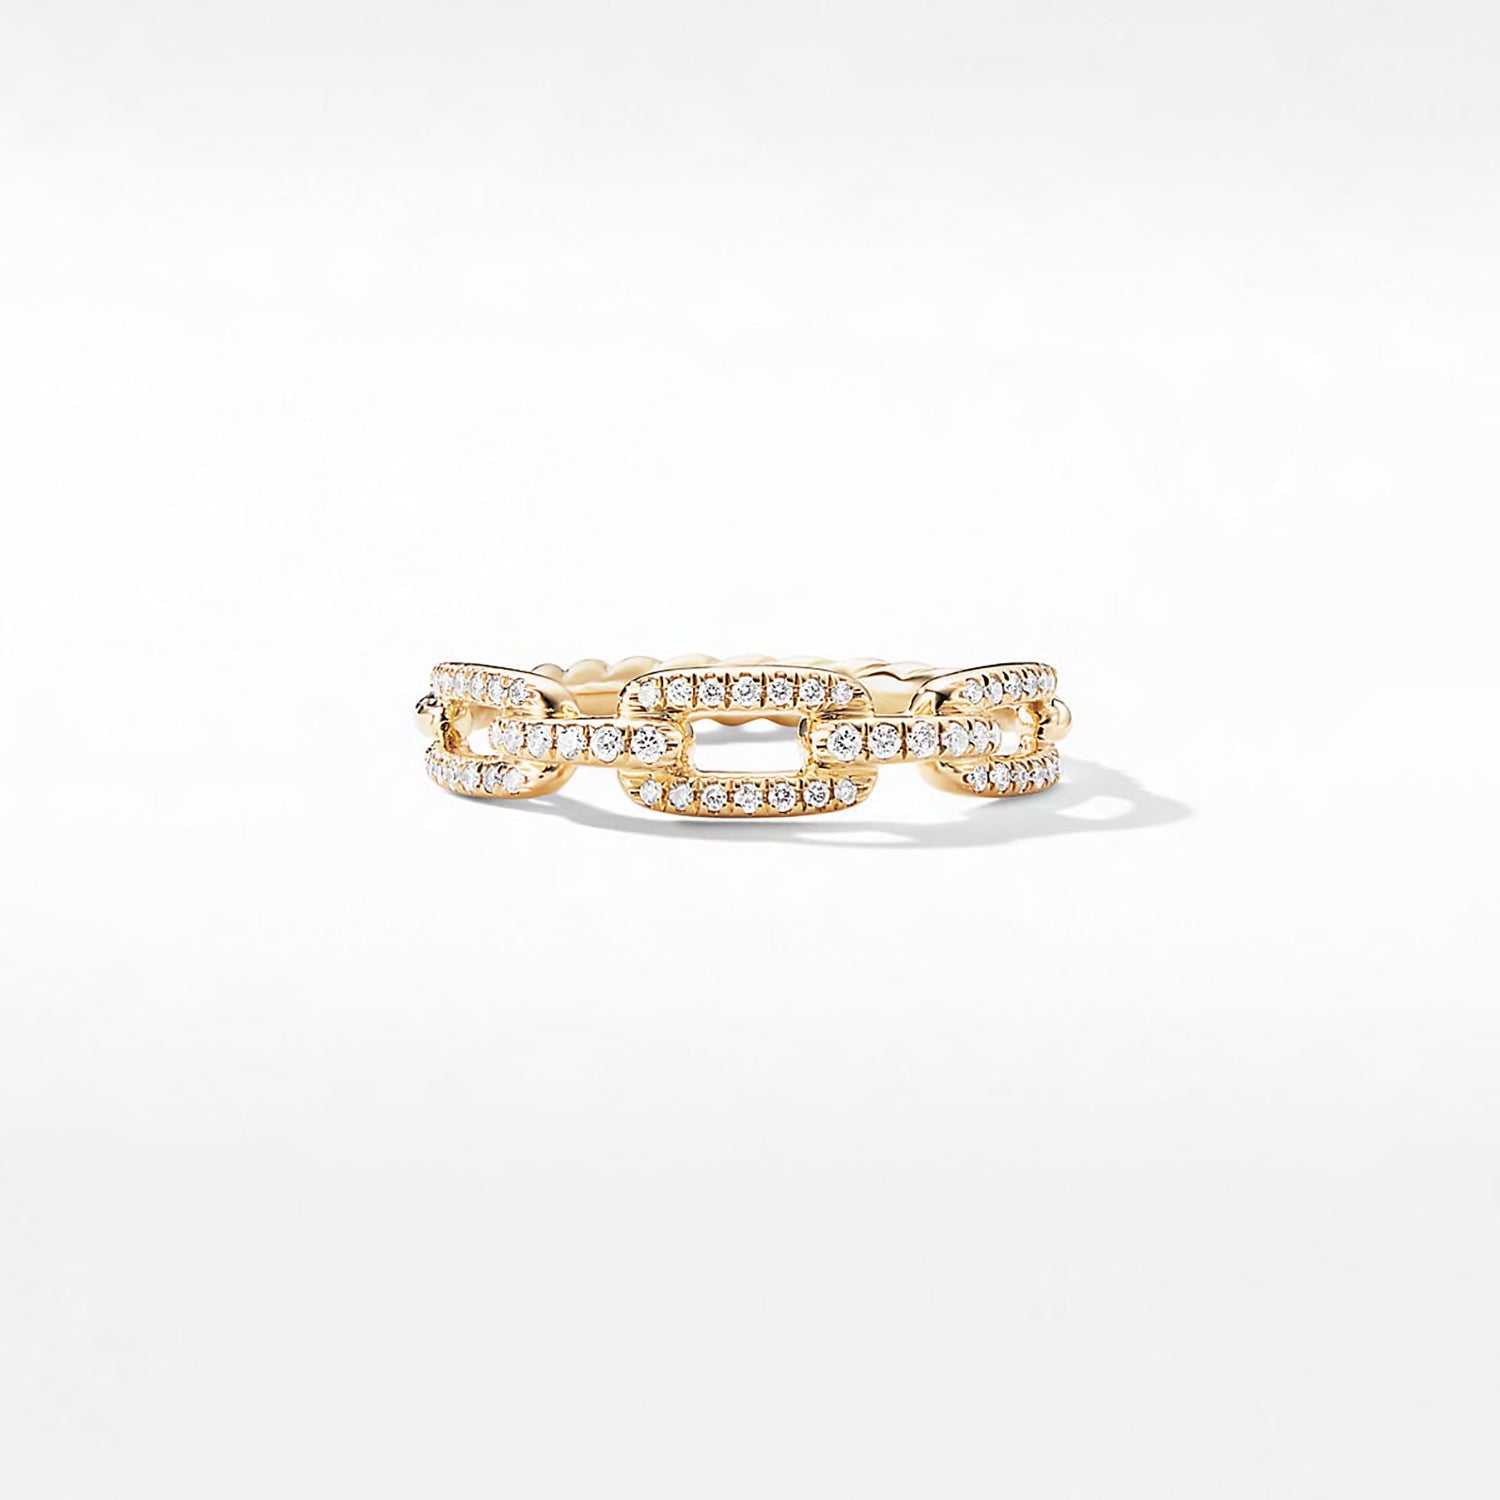 Stax Single Row Pavé Chain Link Ring with Diamonds in 18K Gold, 4.5mm -6